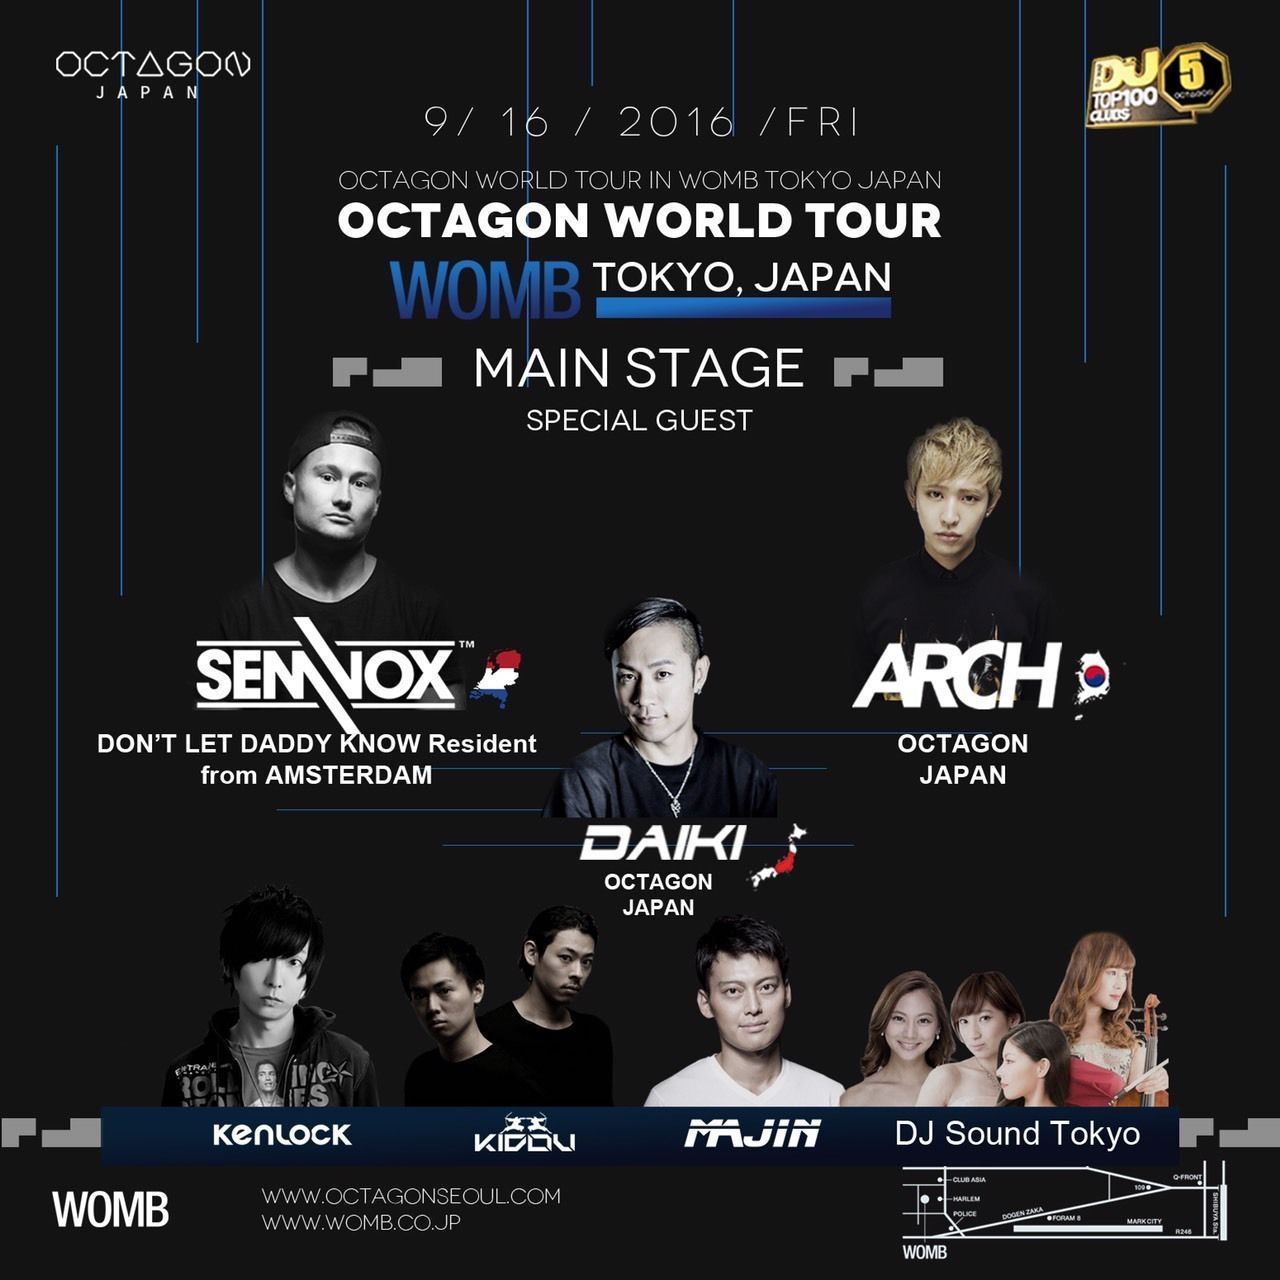 OCTAGON WORLD TOUR IN WOMB TOKYO JAPAN